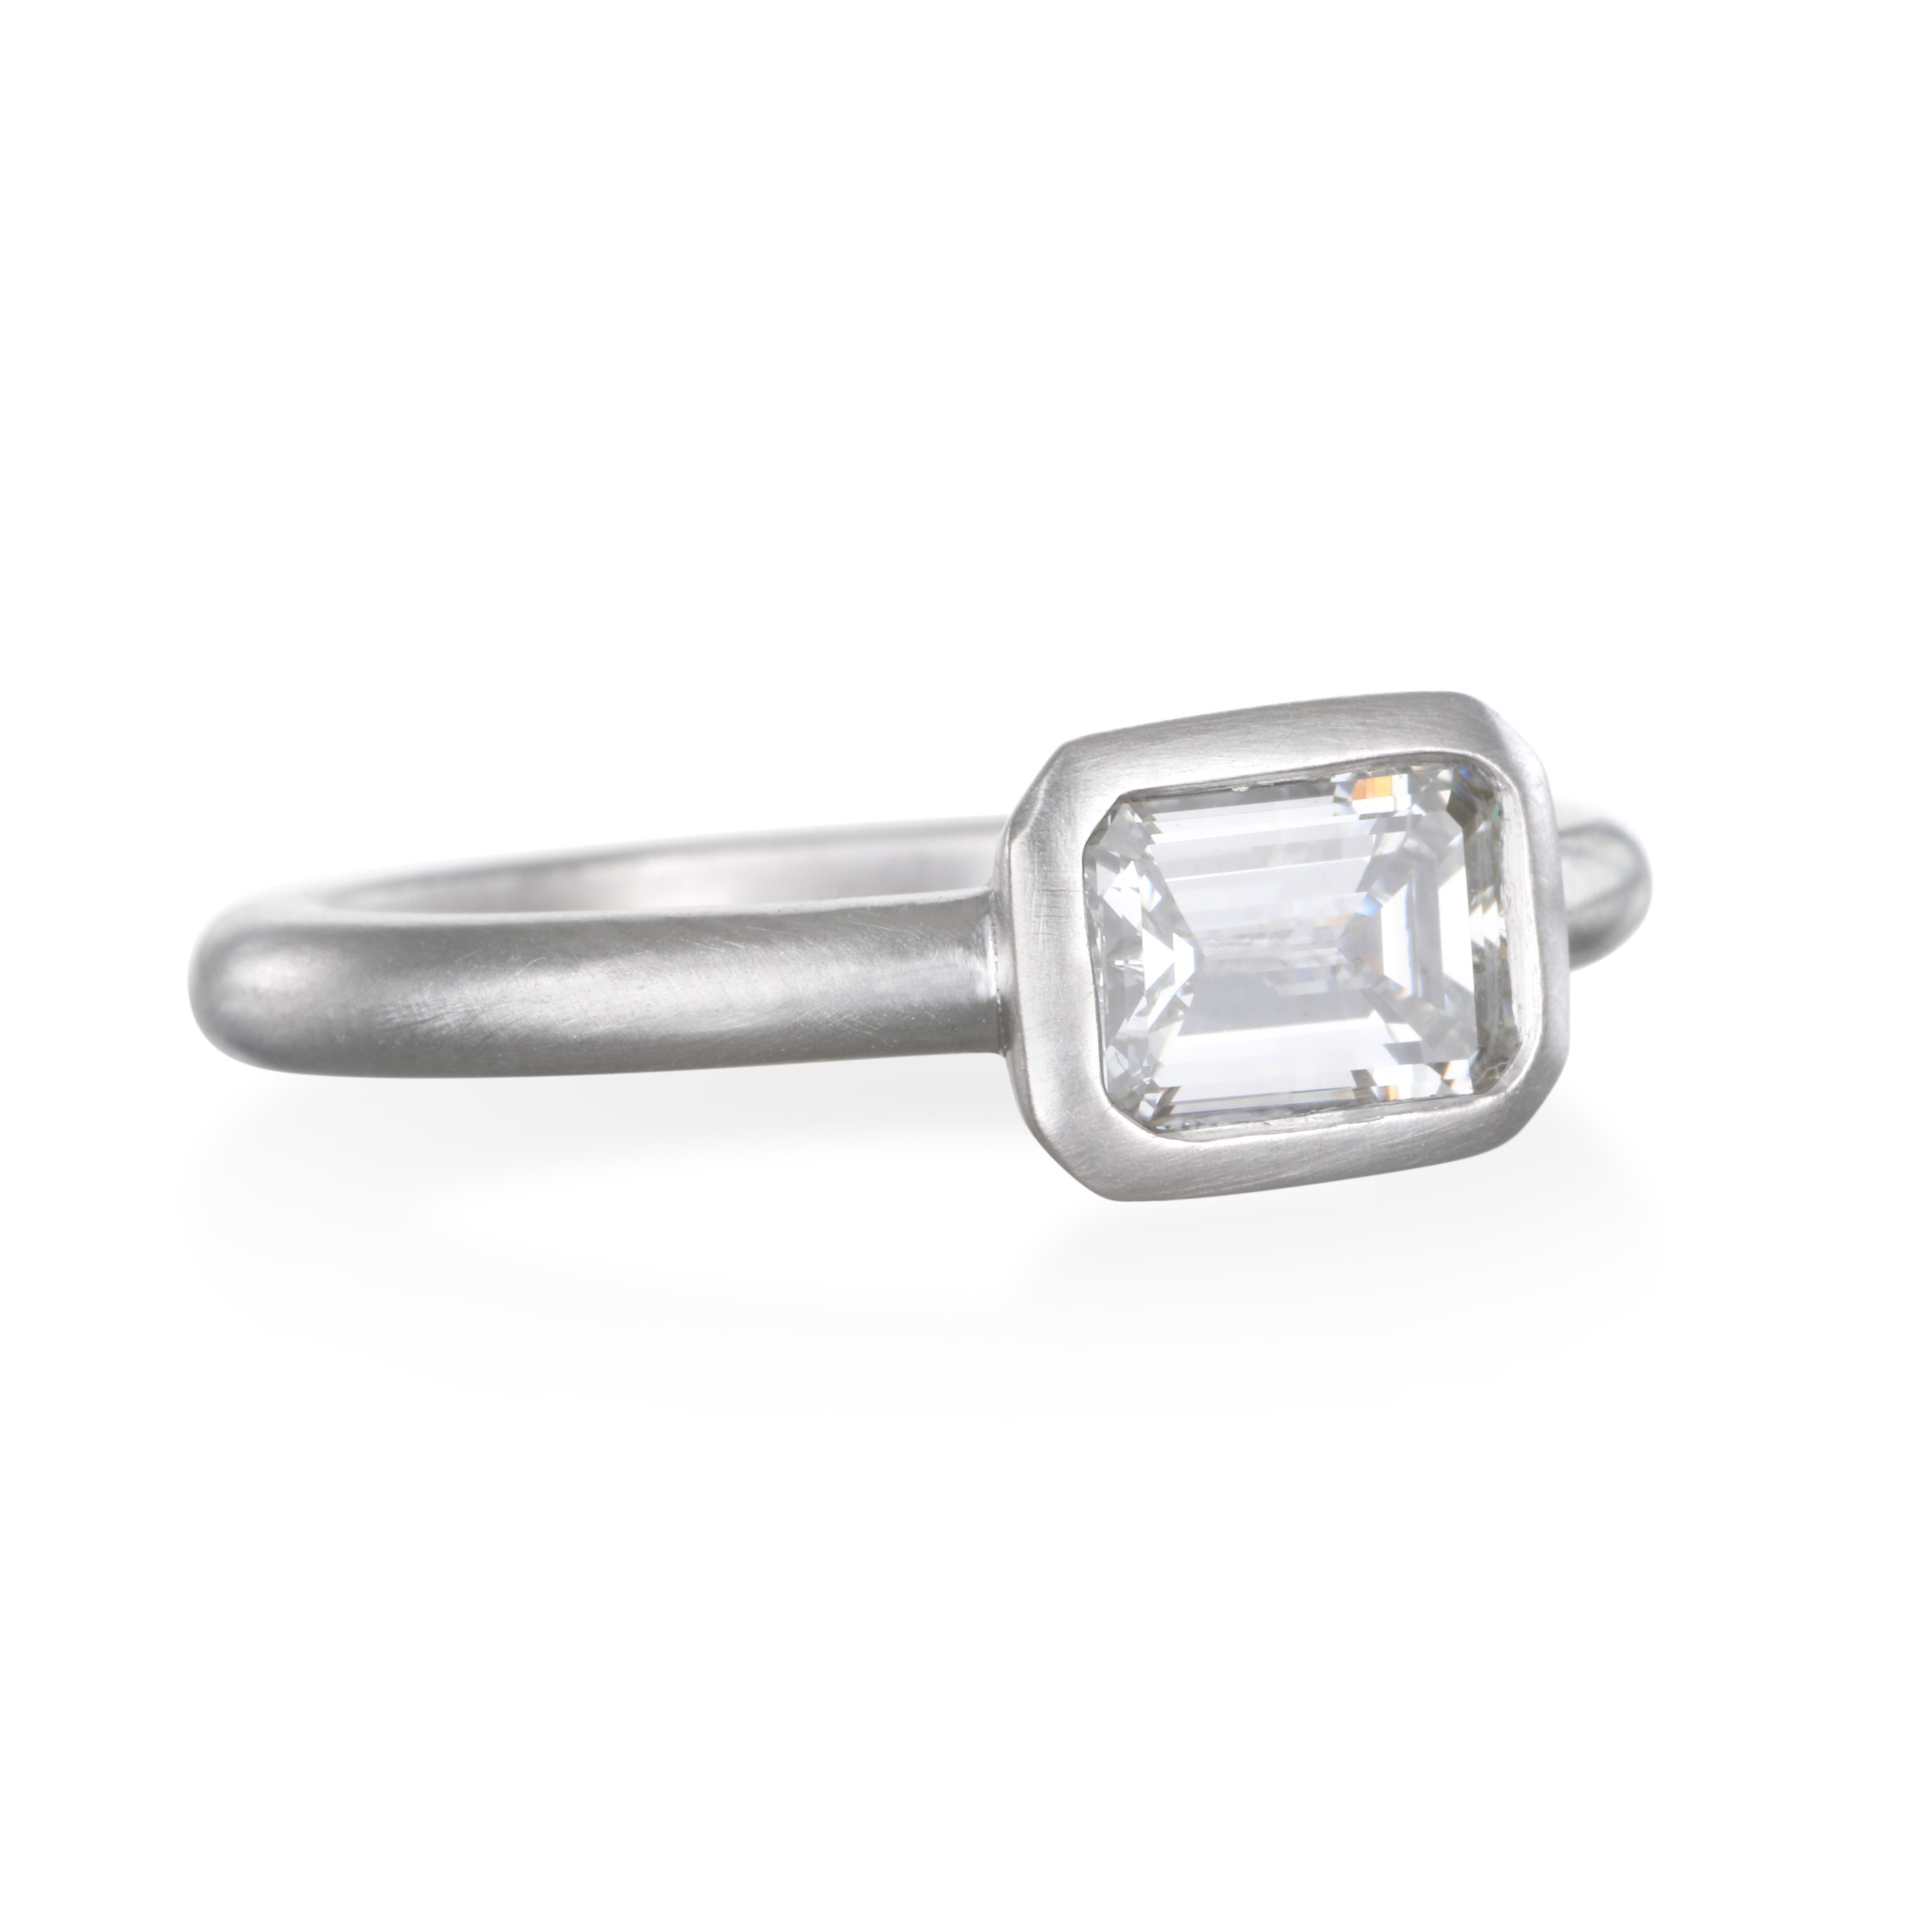 Whether worn as an engagement ring or a stack ring, Faye Kim's Emerald cut diamond ring in Platinum is handcrafted with a beautiful matte finish for a clean, contemporary feel.
Size 7
Diamond - 1.04 Carats
GIA Certified - I Color, VS1 Quality